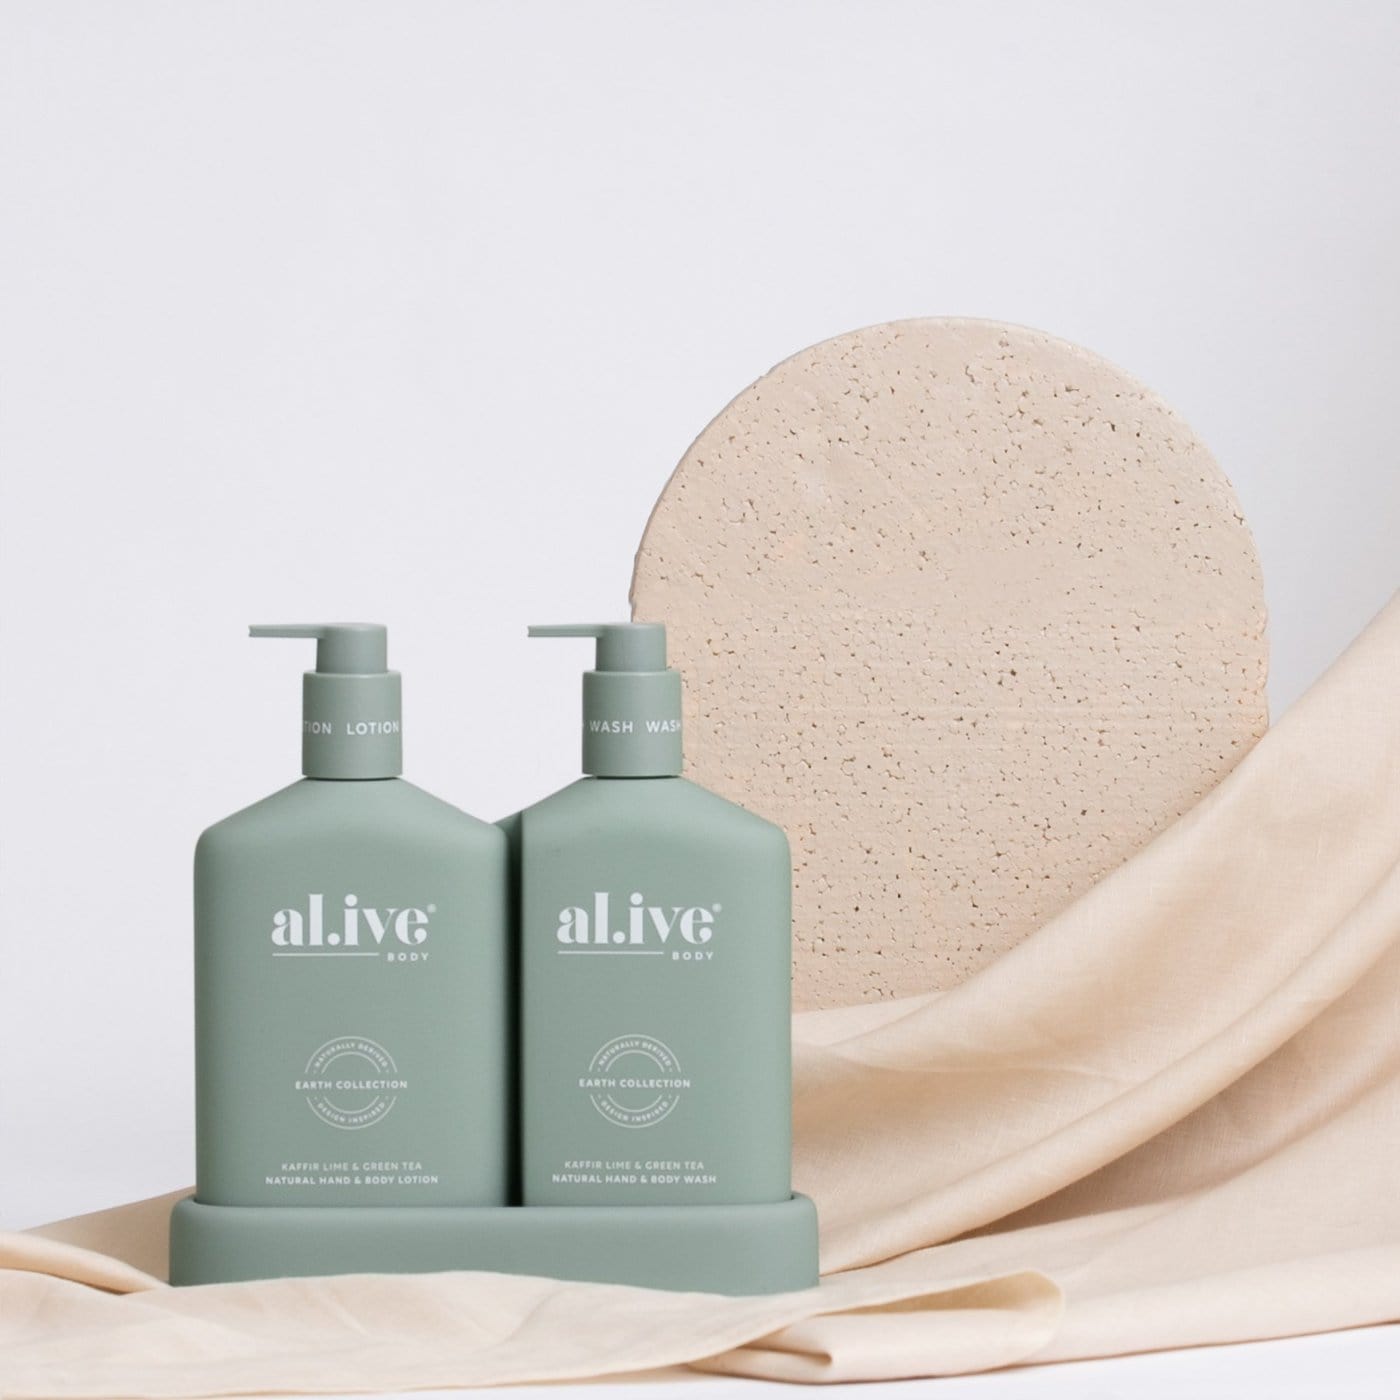 al.ive body Soap & Lotion Dispensers Kaffir Lime & Green Tea Hand & Body Wash & Lotion Duo + Tray